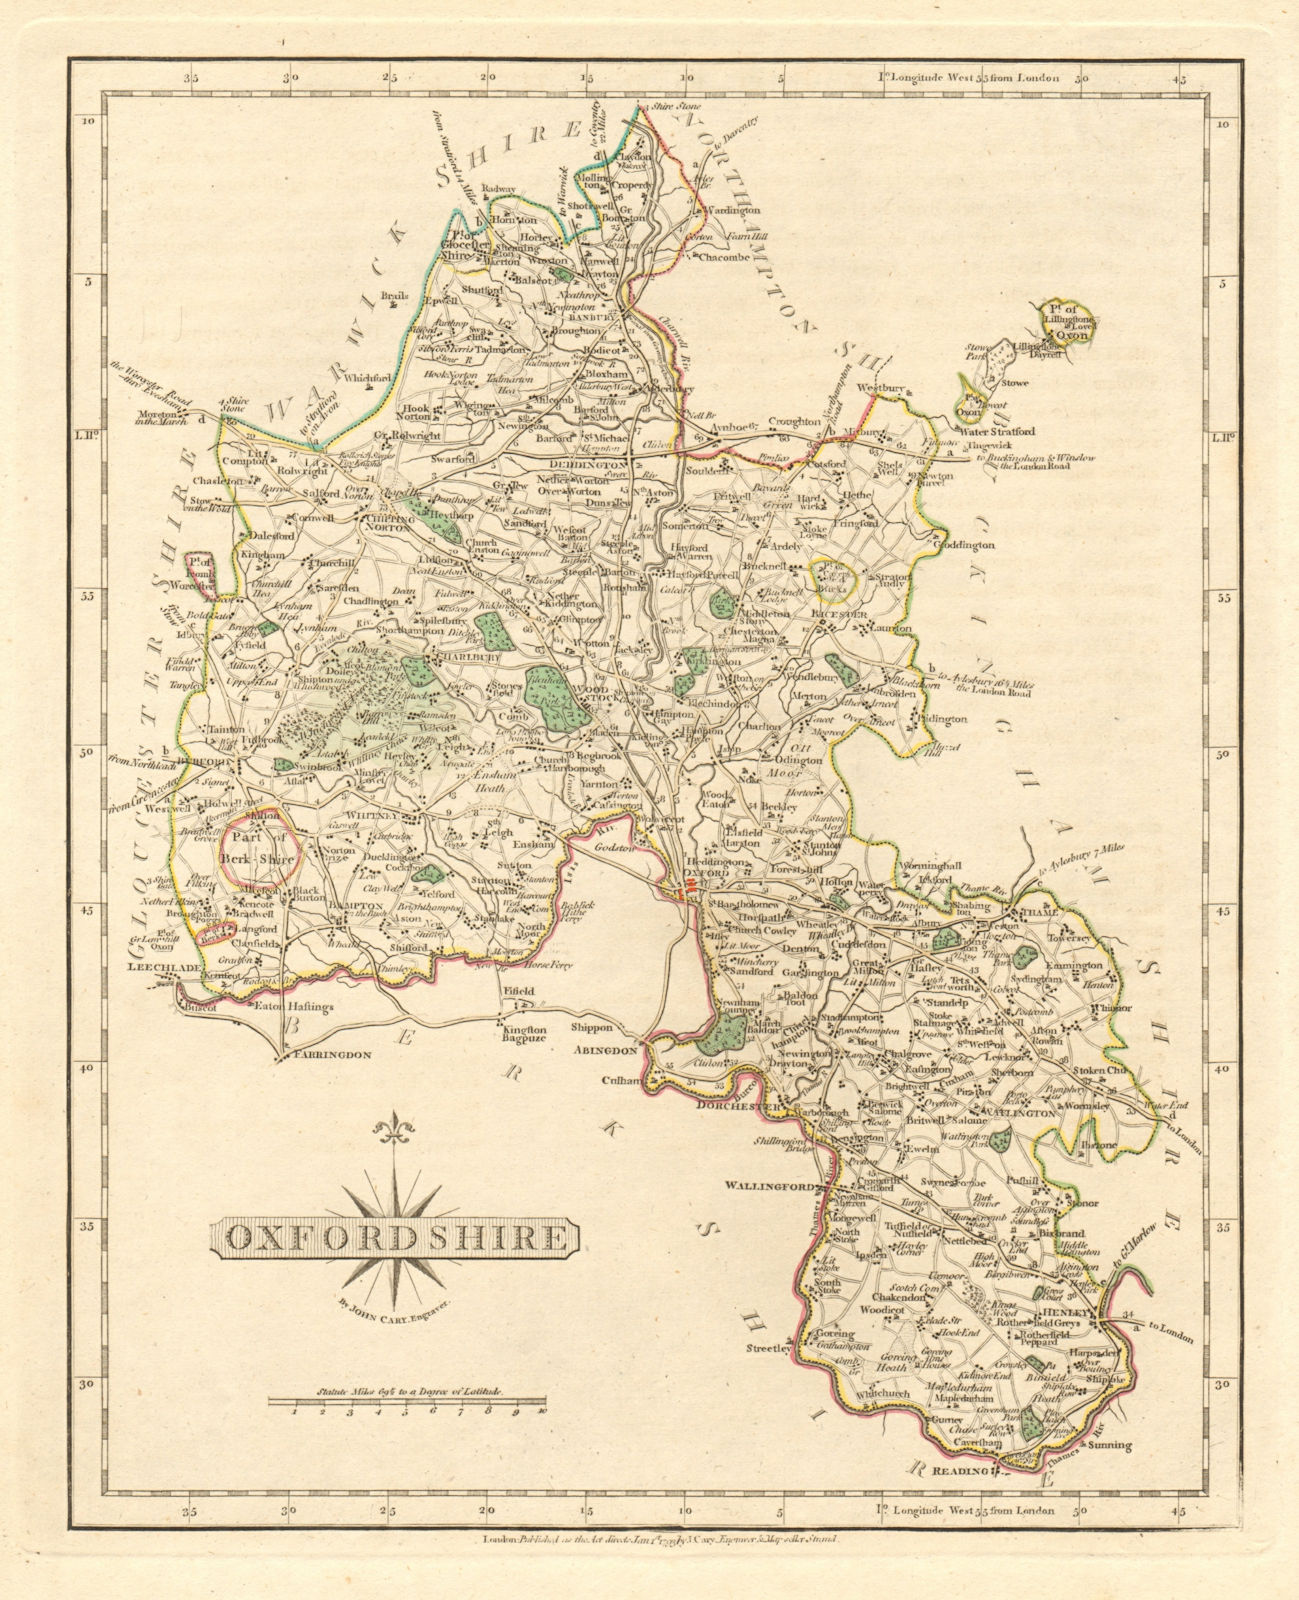 Antique county map of OXFORDSHIRE by JOHN CARY. Original outline colour 1793